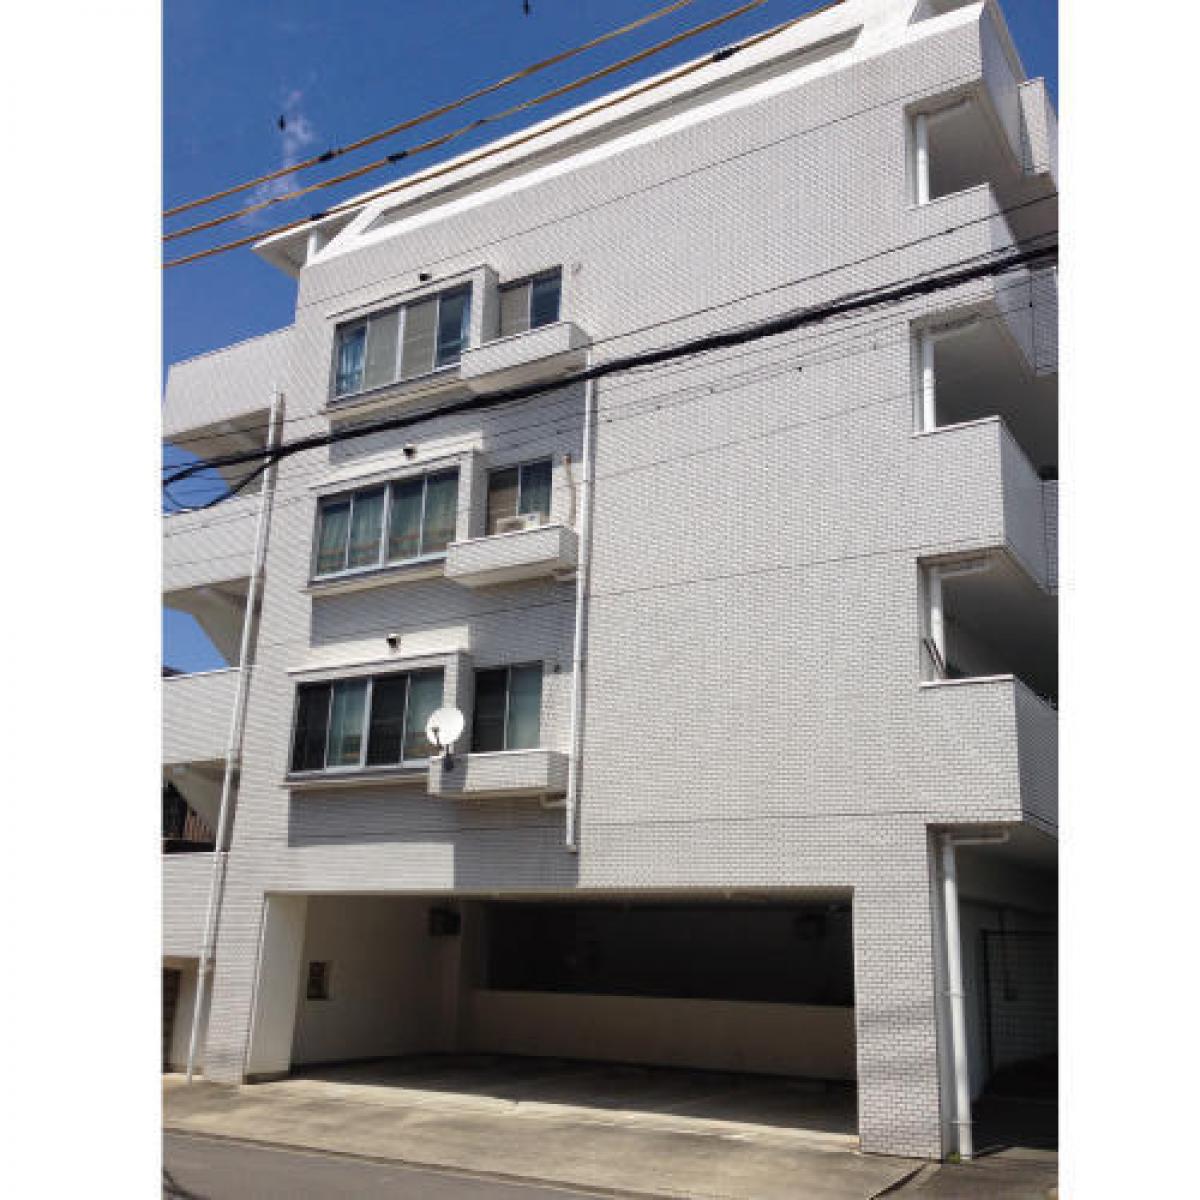 Picture of Apartment For Sale in Kiyosu Shi, Aichi, Japan